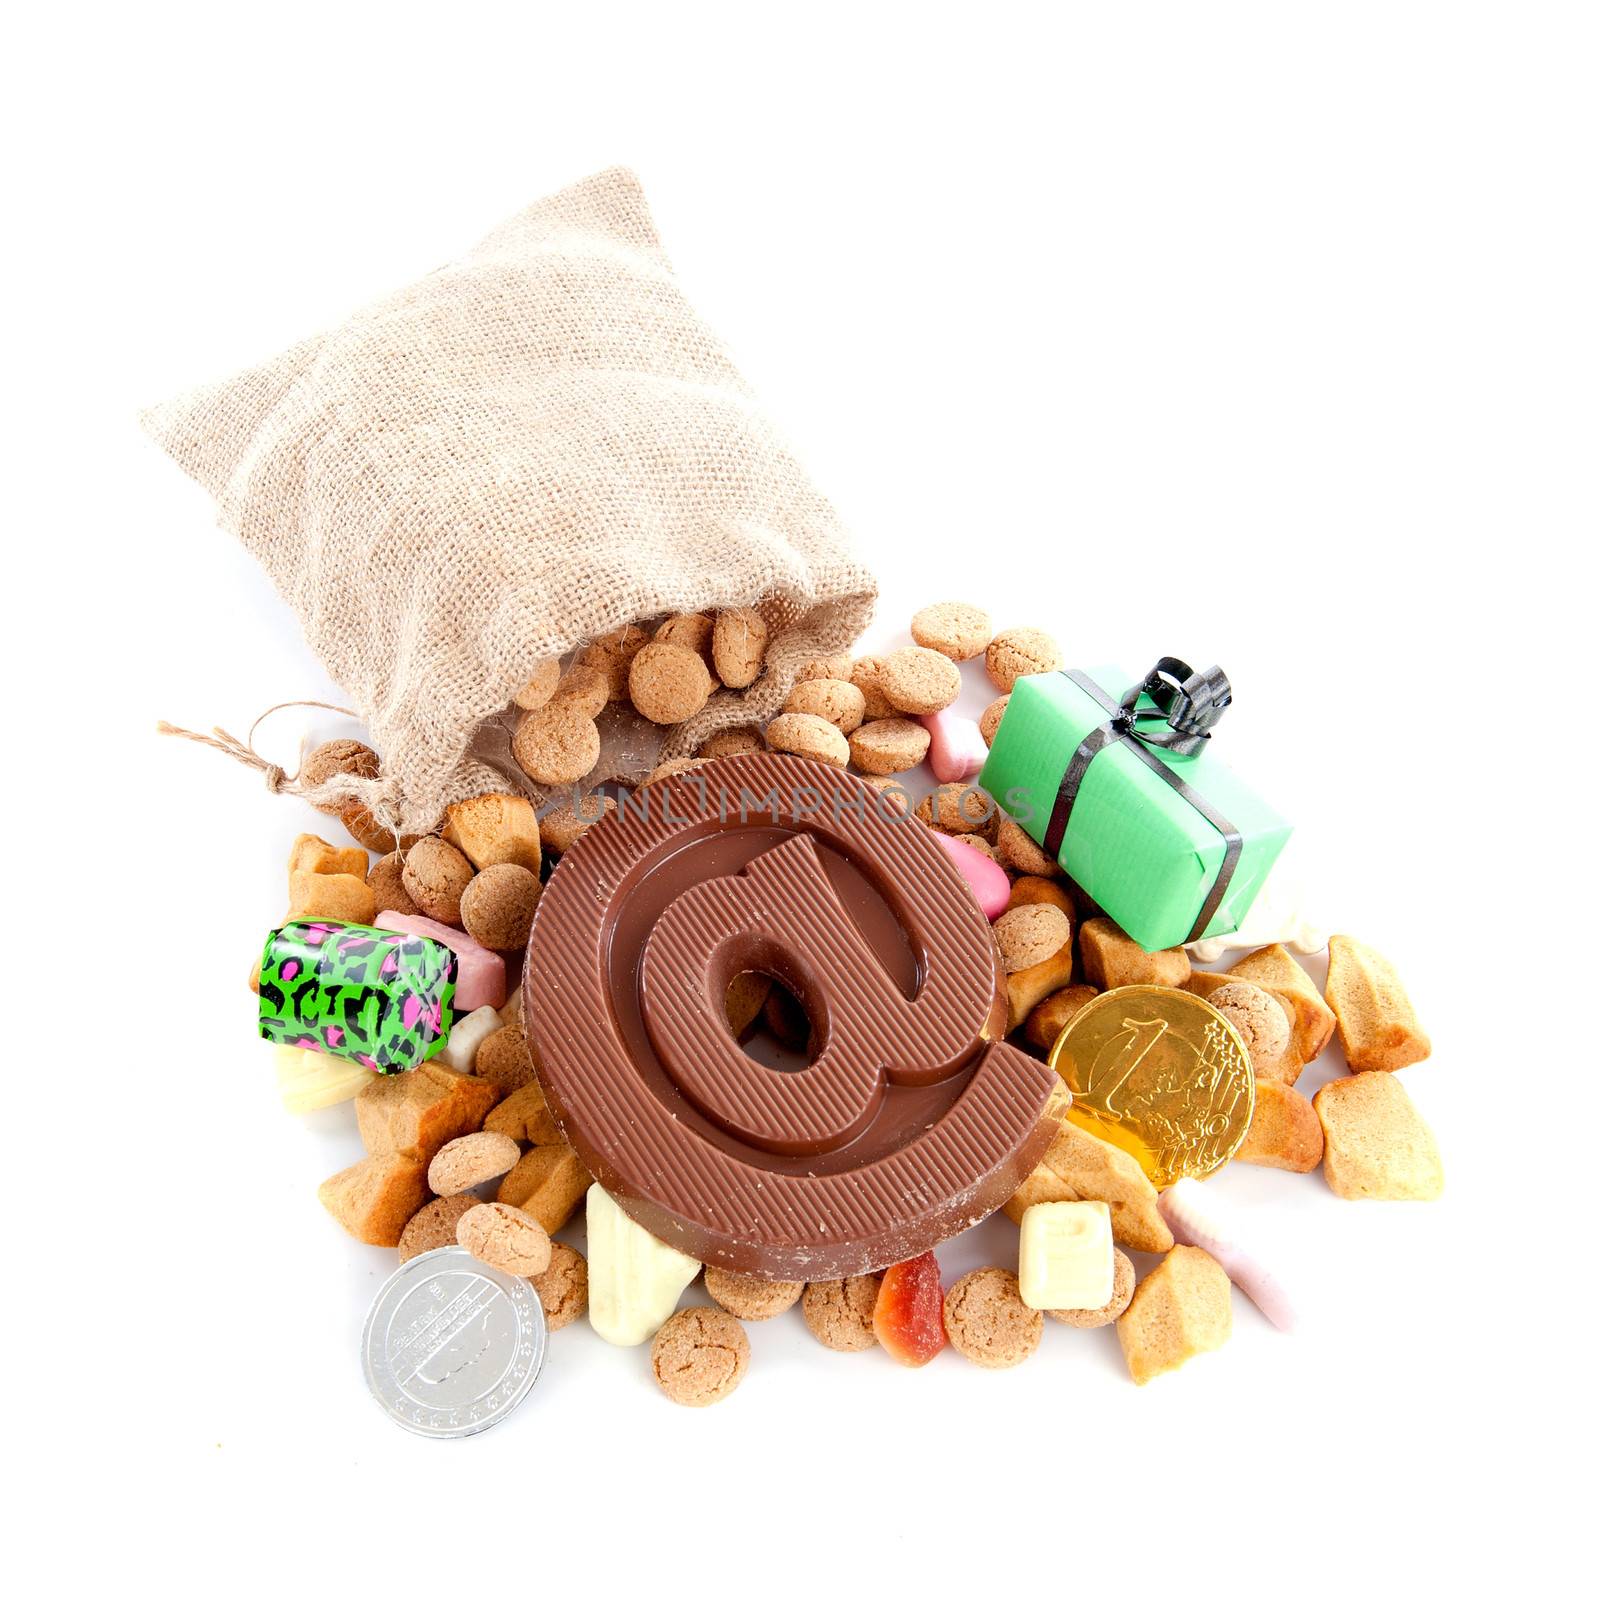 a jute bag with pepernoten, candies and a atpersand, made of chocolate on a white background